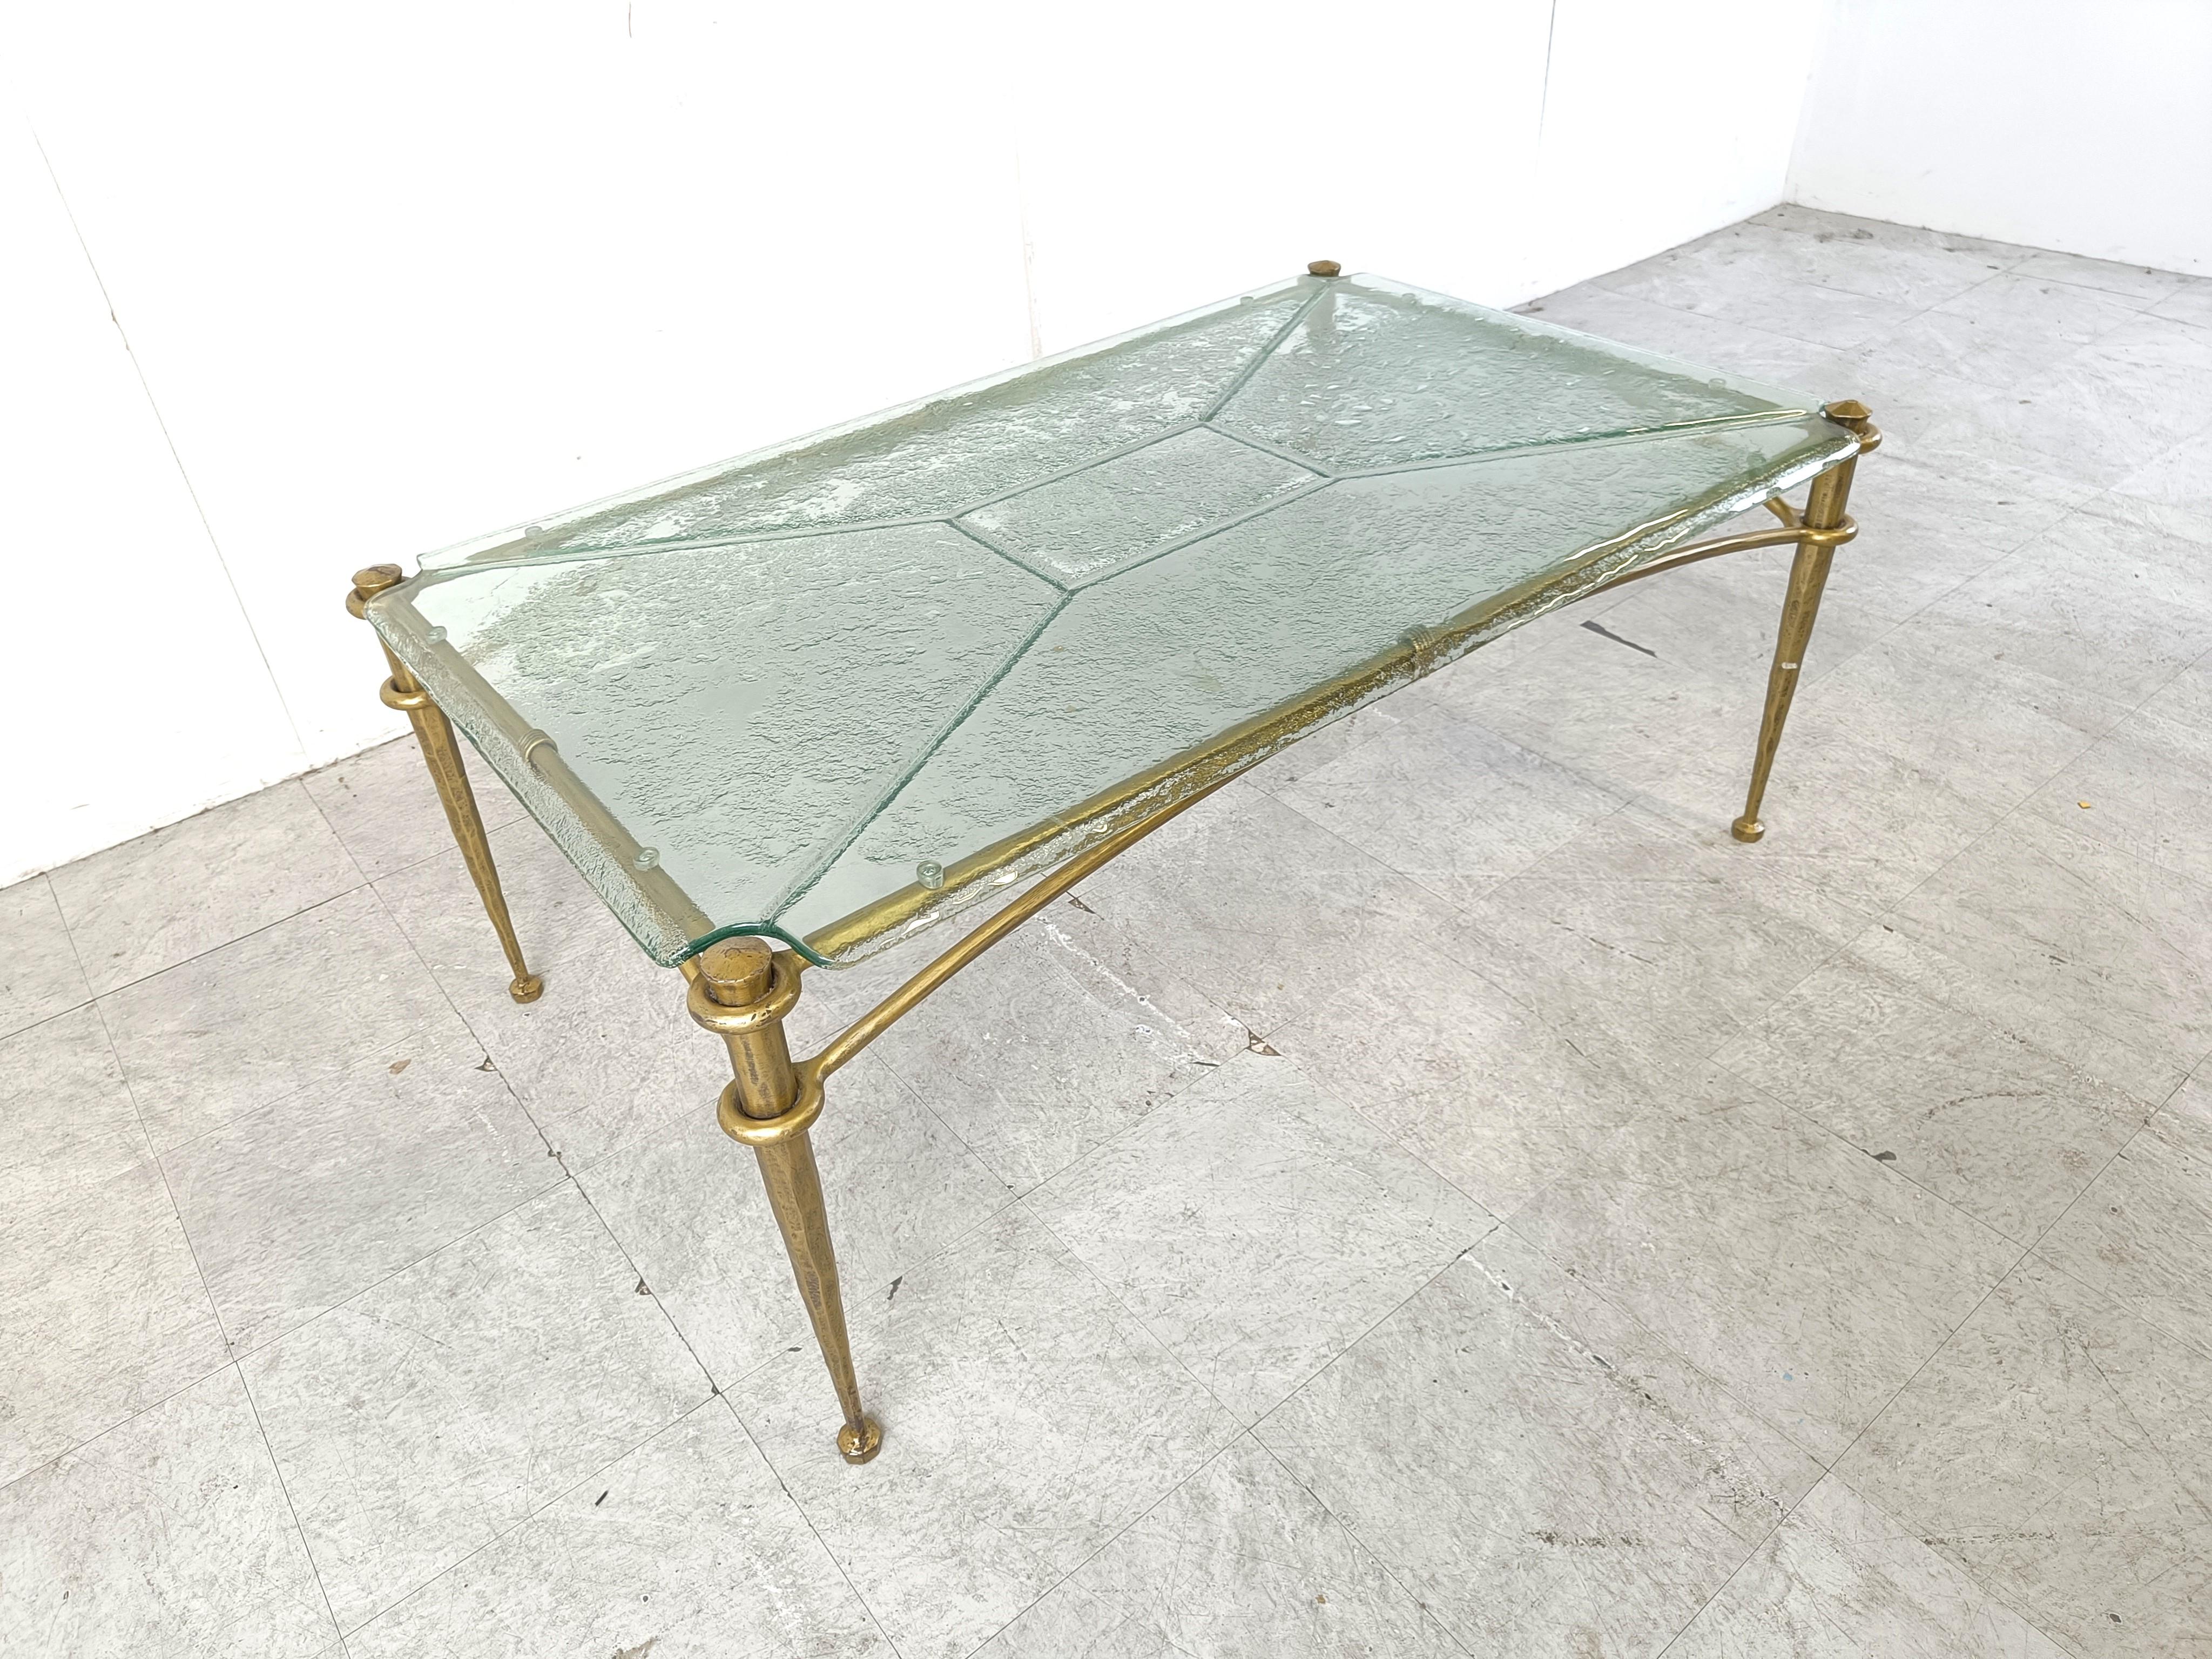 Rare brutalist coffee table by Lothar Klute consisting of a Sculptural gold iron base and a special glass top.

Glass and base are all made by hand.

Very good condition

1970s- Germany

Height: 50cm/19.68